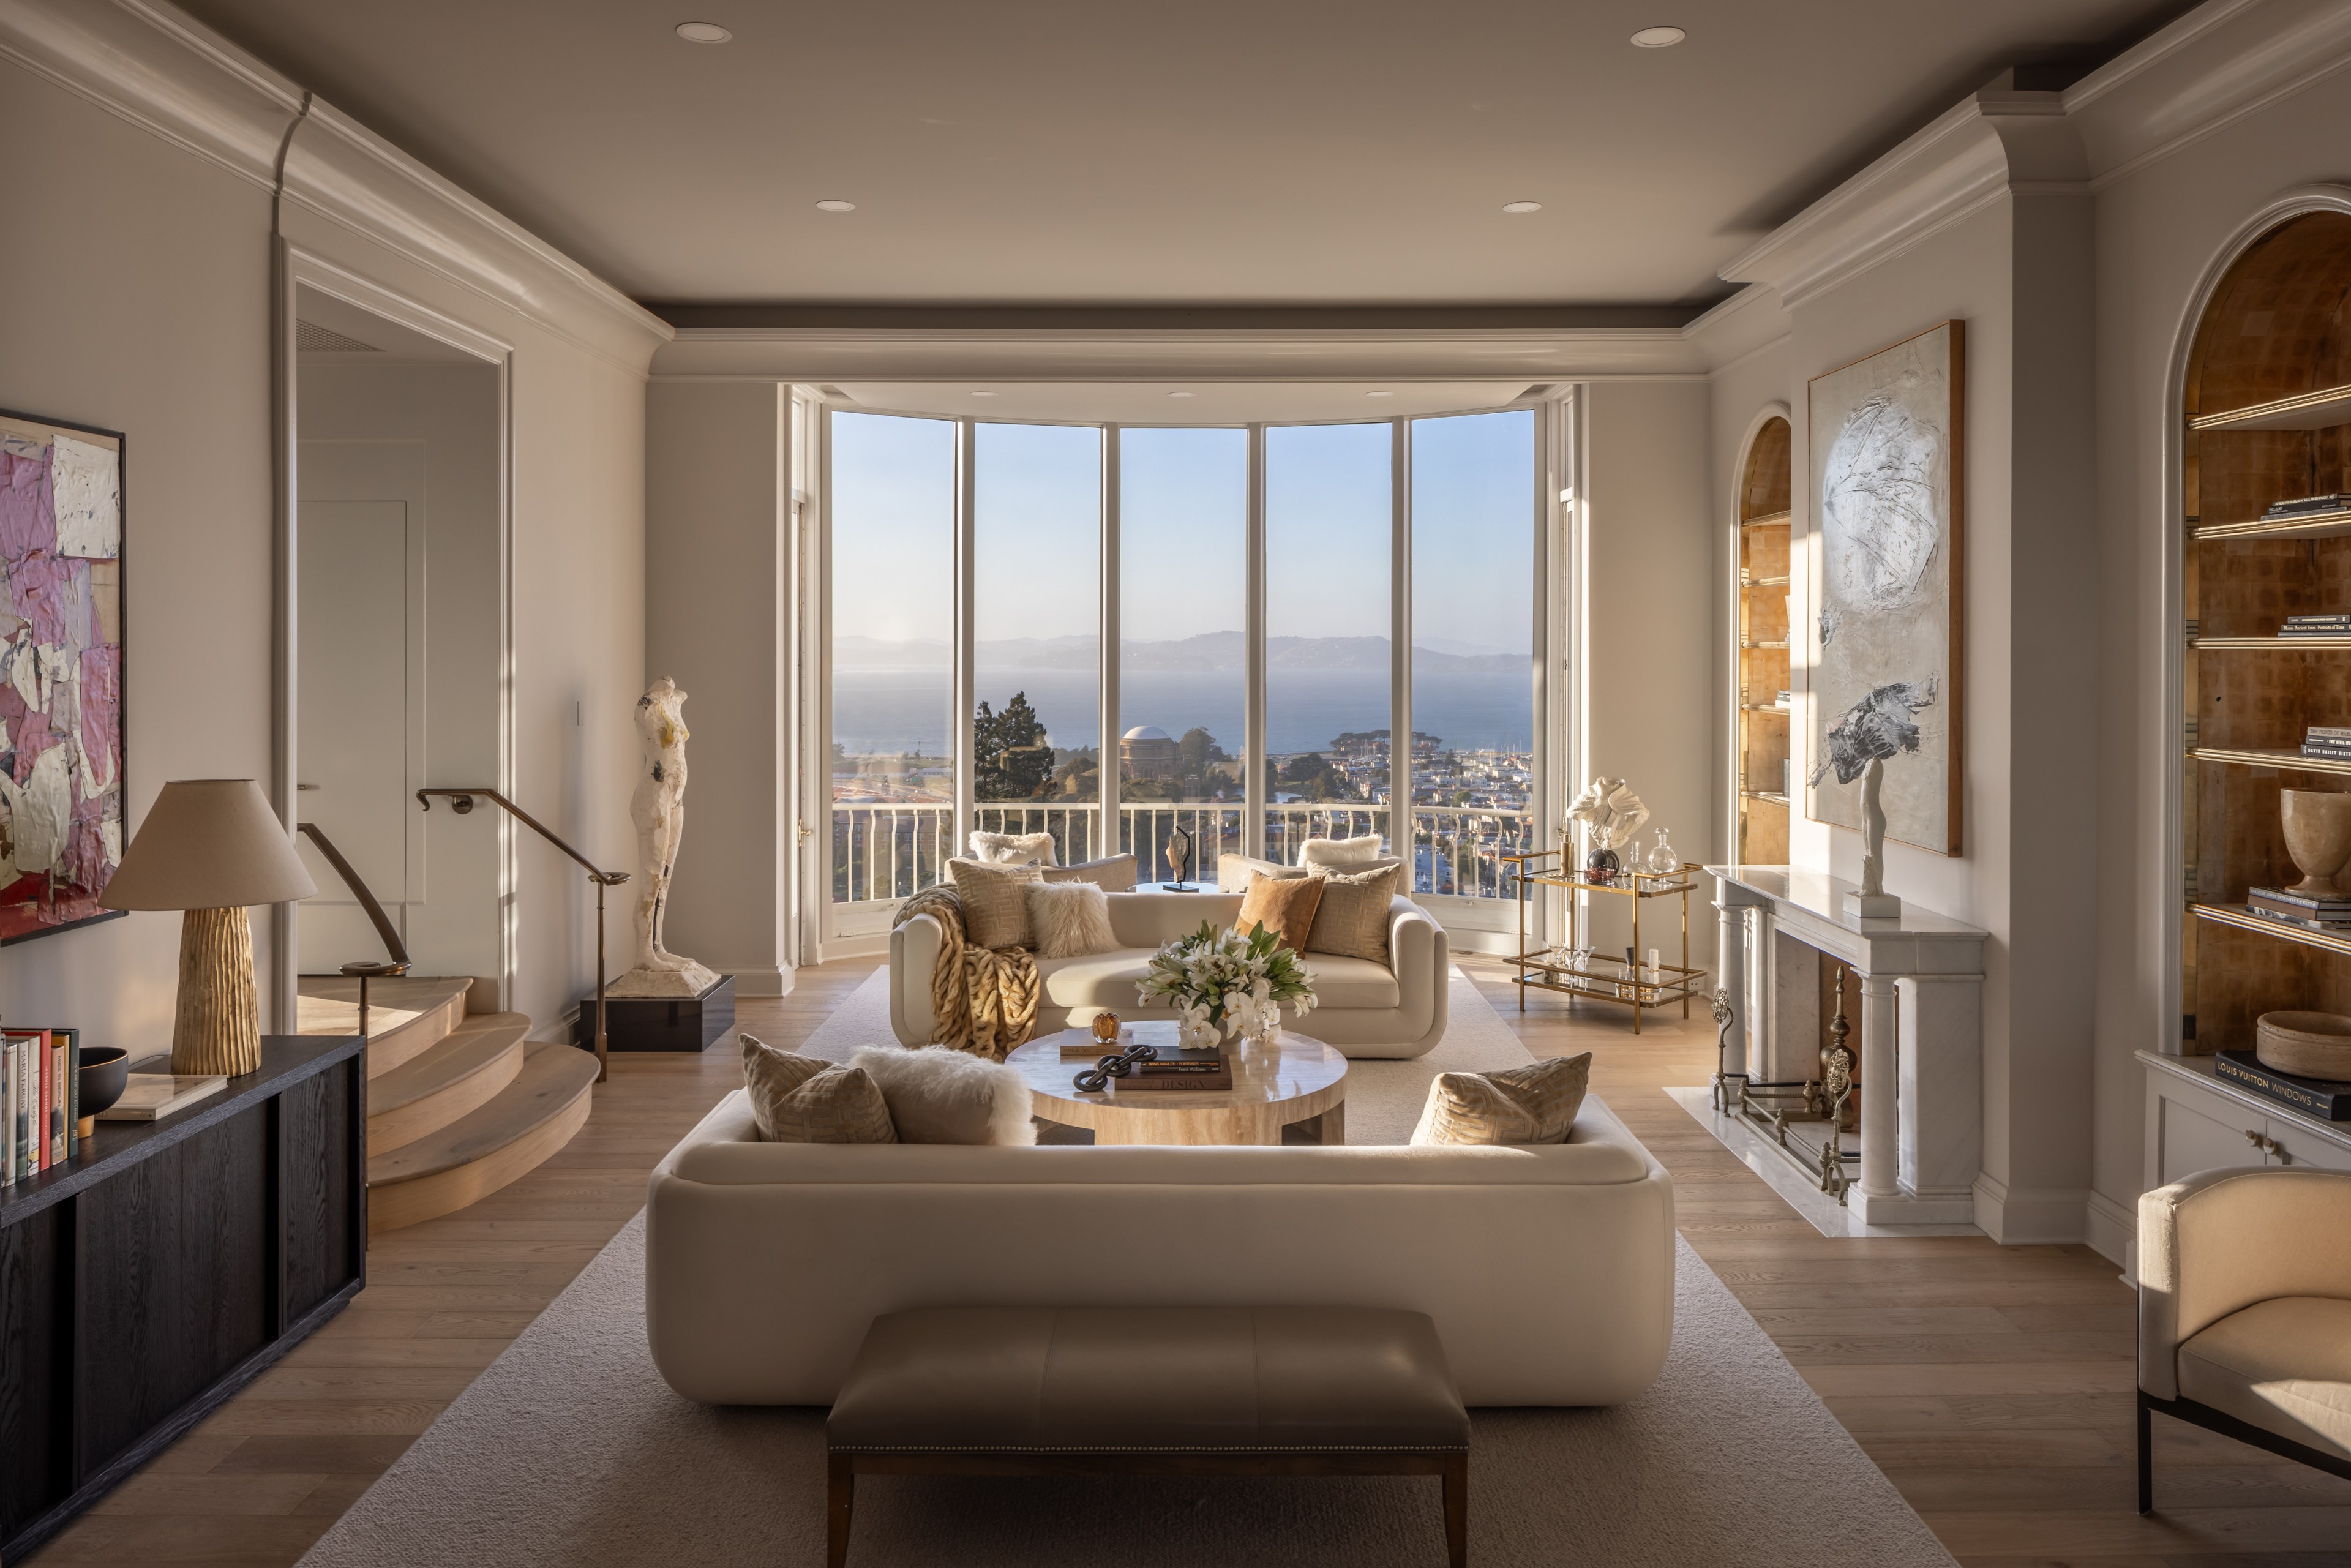 A sophisticated living room with plush white sofas, marble fireplace, large windows offering a coastal view, modern artwork, bookshelves, and elegant decor.